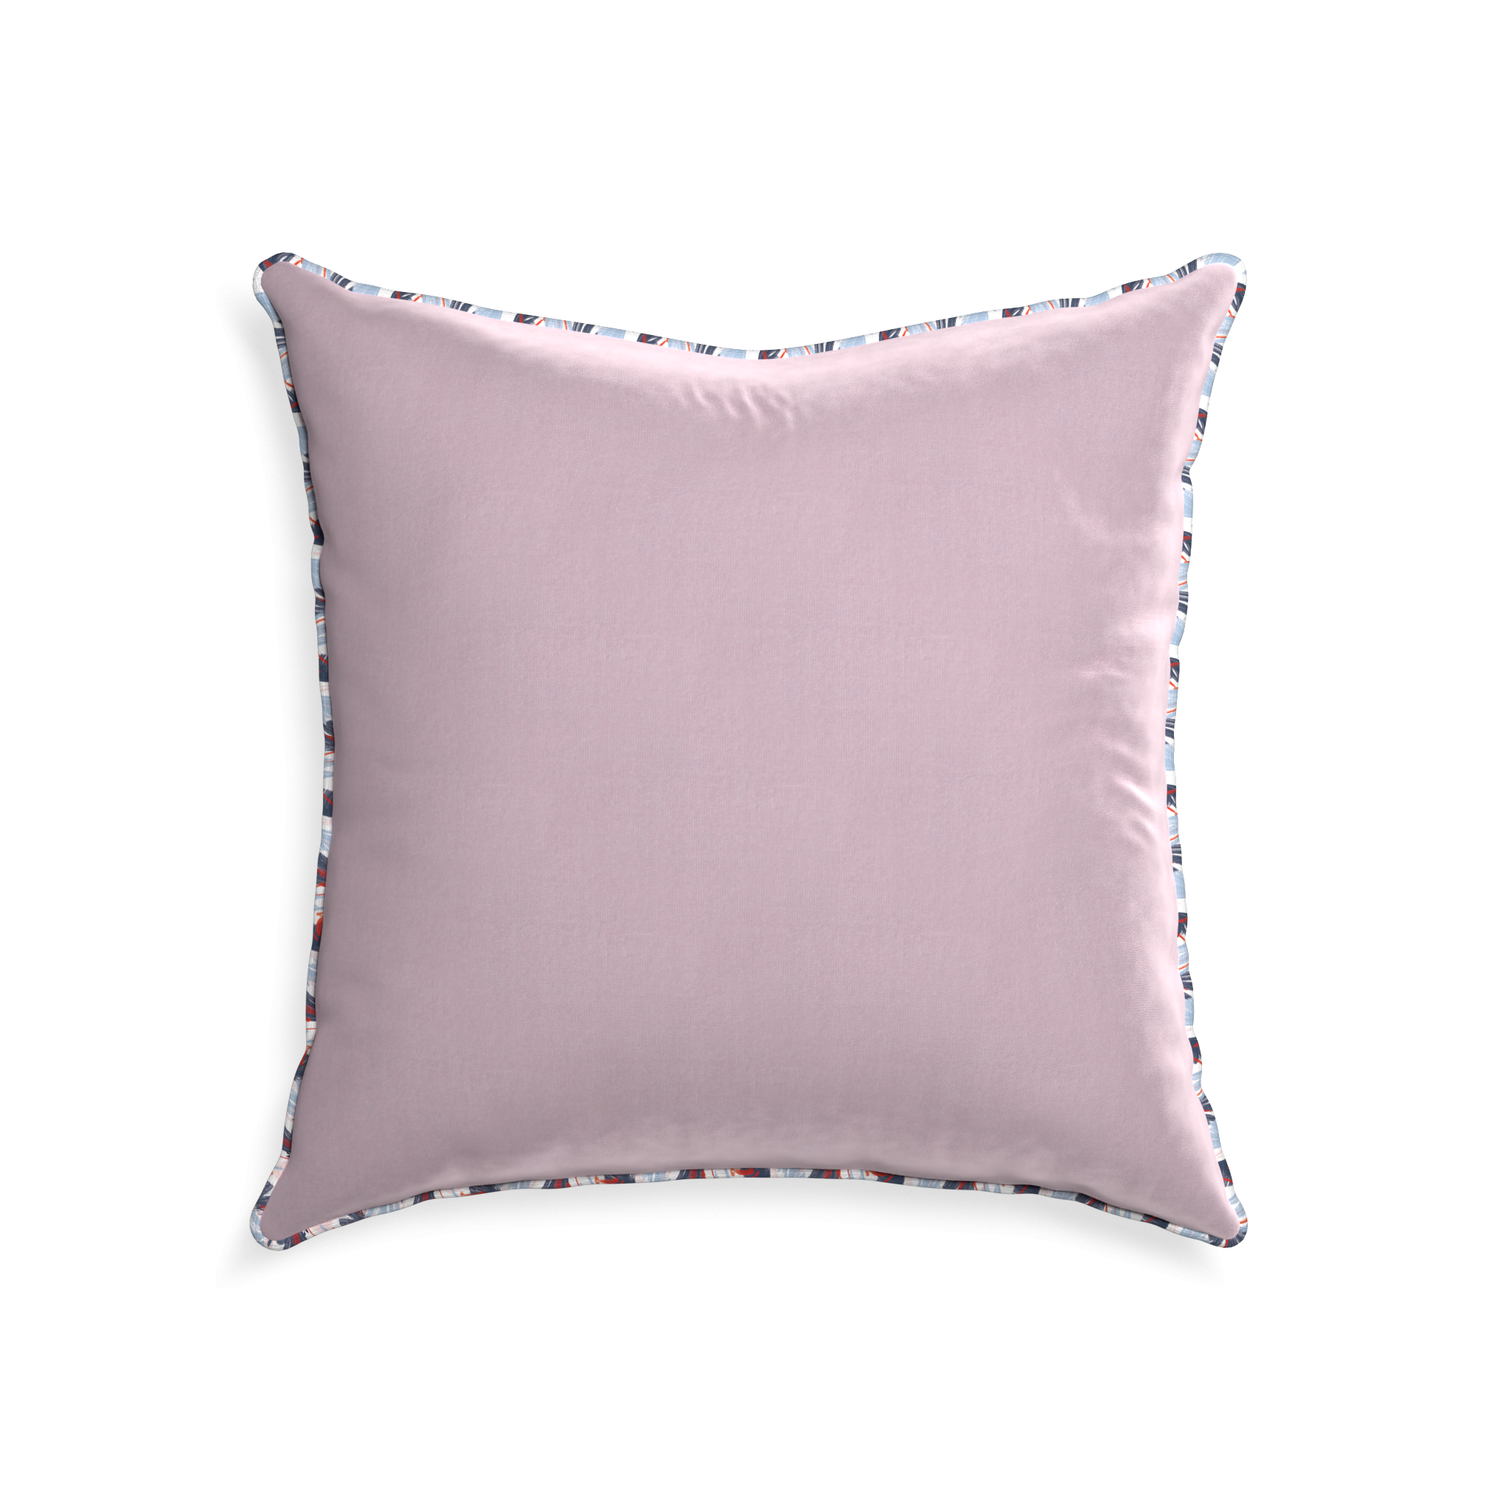 22-square lilac velvet custom pillow with e piping on white background